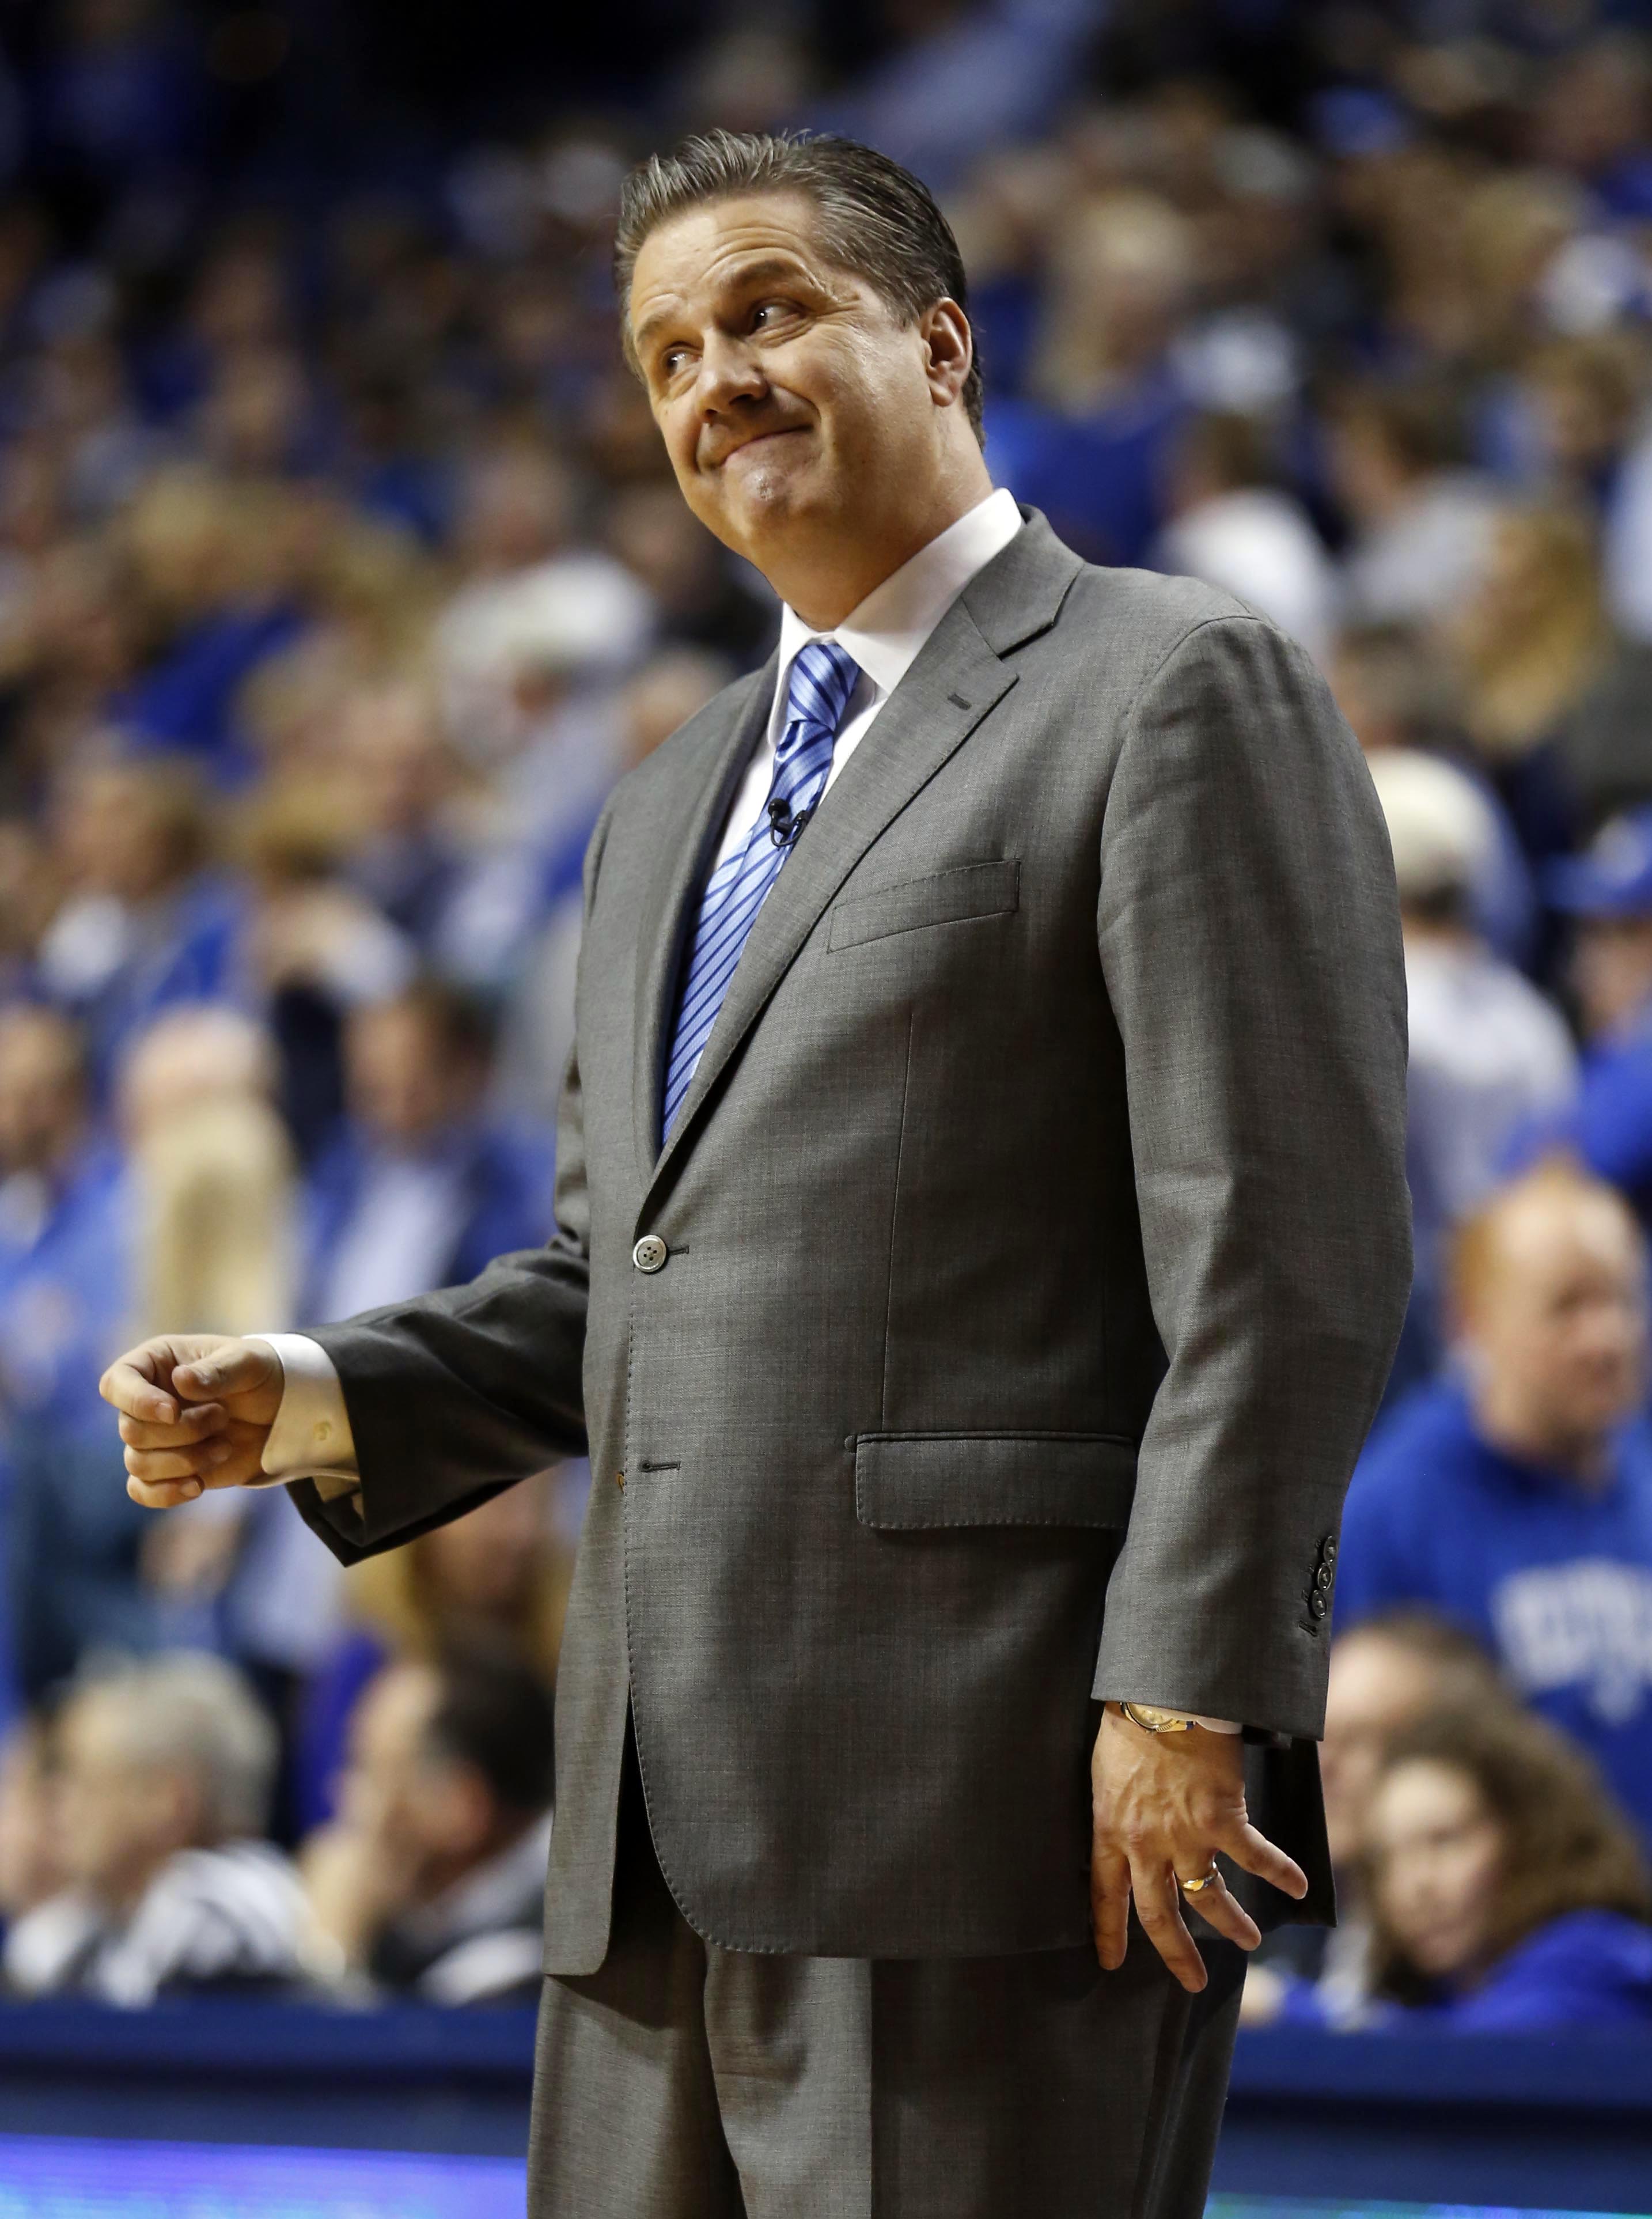 Jan 20, 2015; Lexington, KY, USA; Kentucky Wildcats head coach John Calipari reacts to a play during the game against the Vanderbilt Commodores in the second half at Rupp Arena. The Kentucky Wildcats defeated the Vanderbilt Commodores 65-57. Mandatory Credit: Mark Zerof-USA TODAY Sports